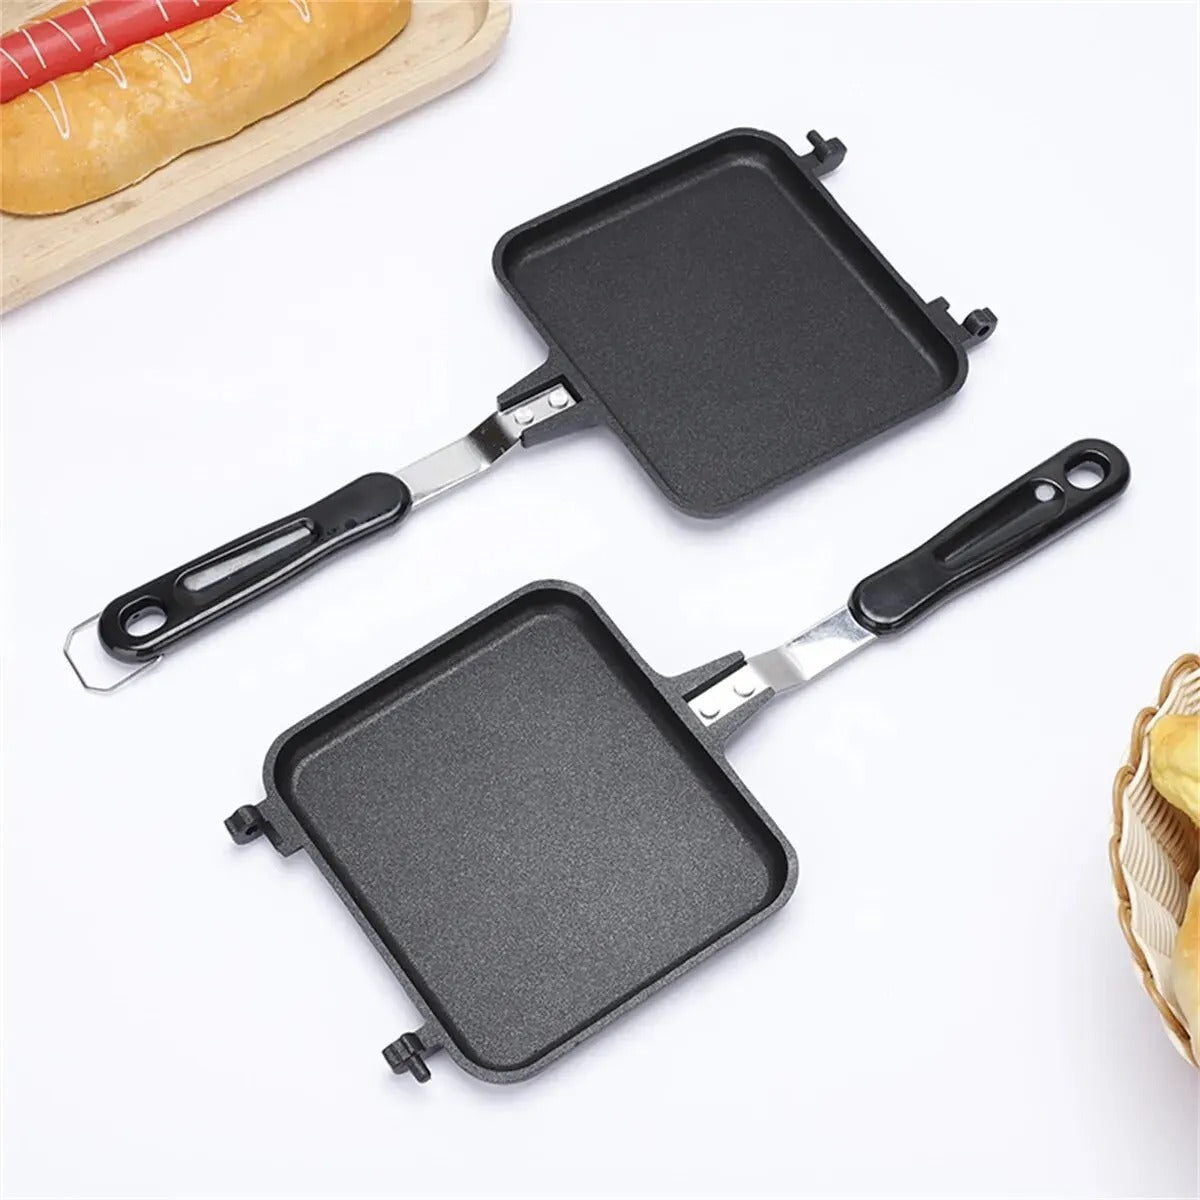 Double Sided Frying Pan